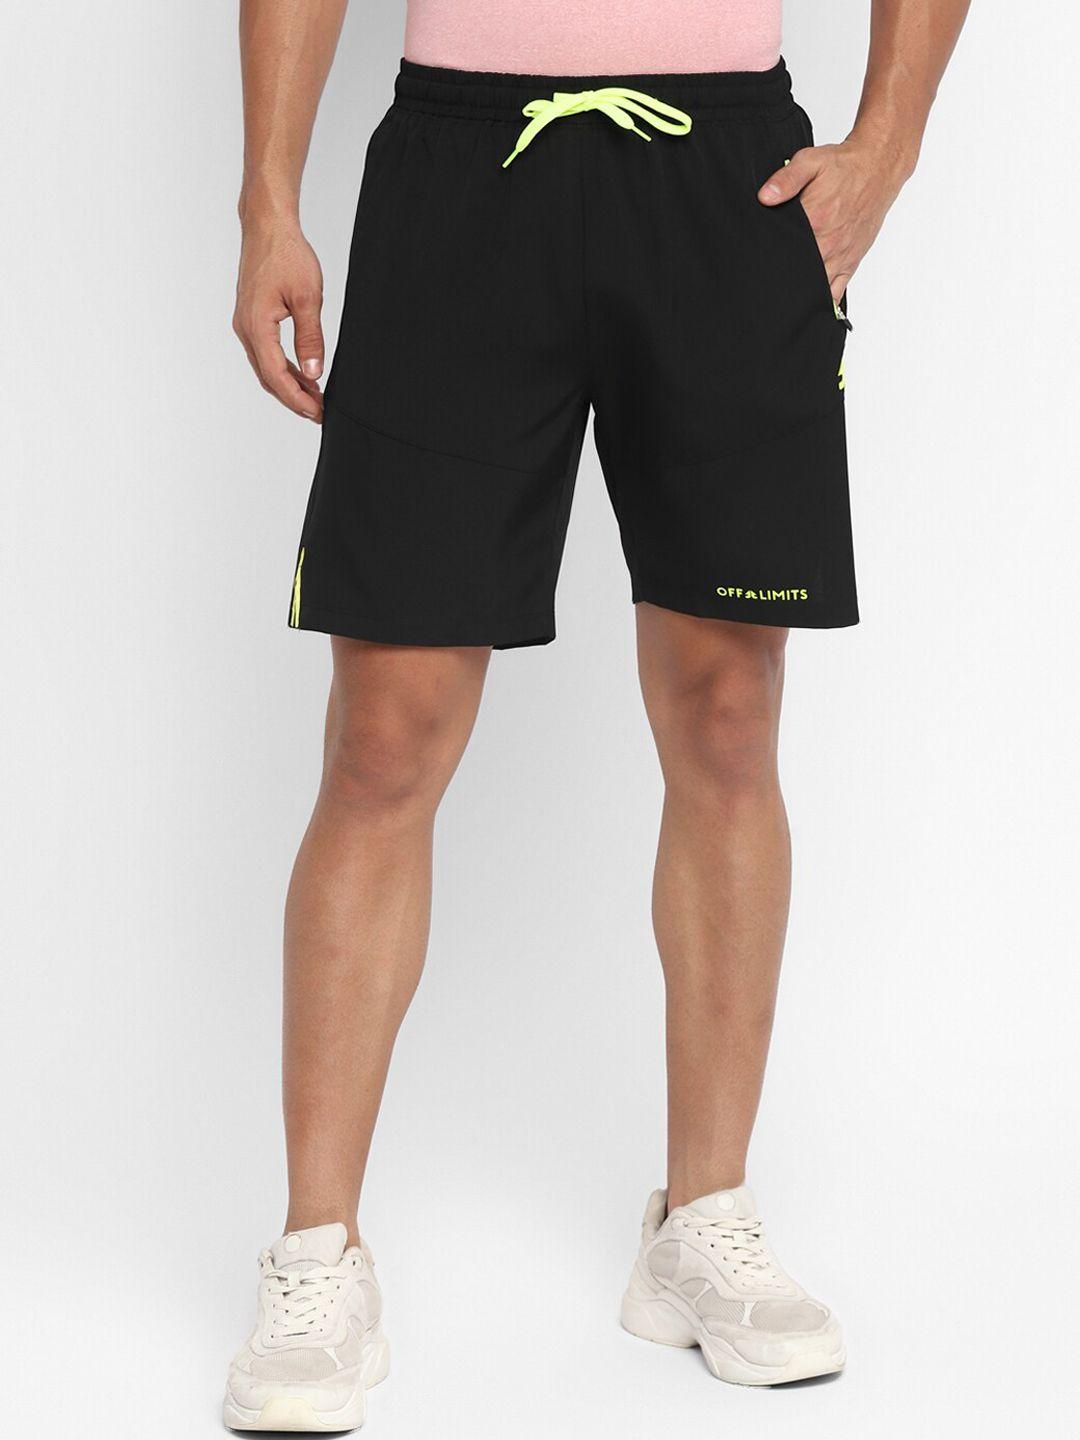 off limits men colourblocked training or gym cotton sports shorts